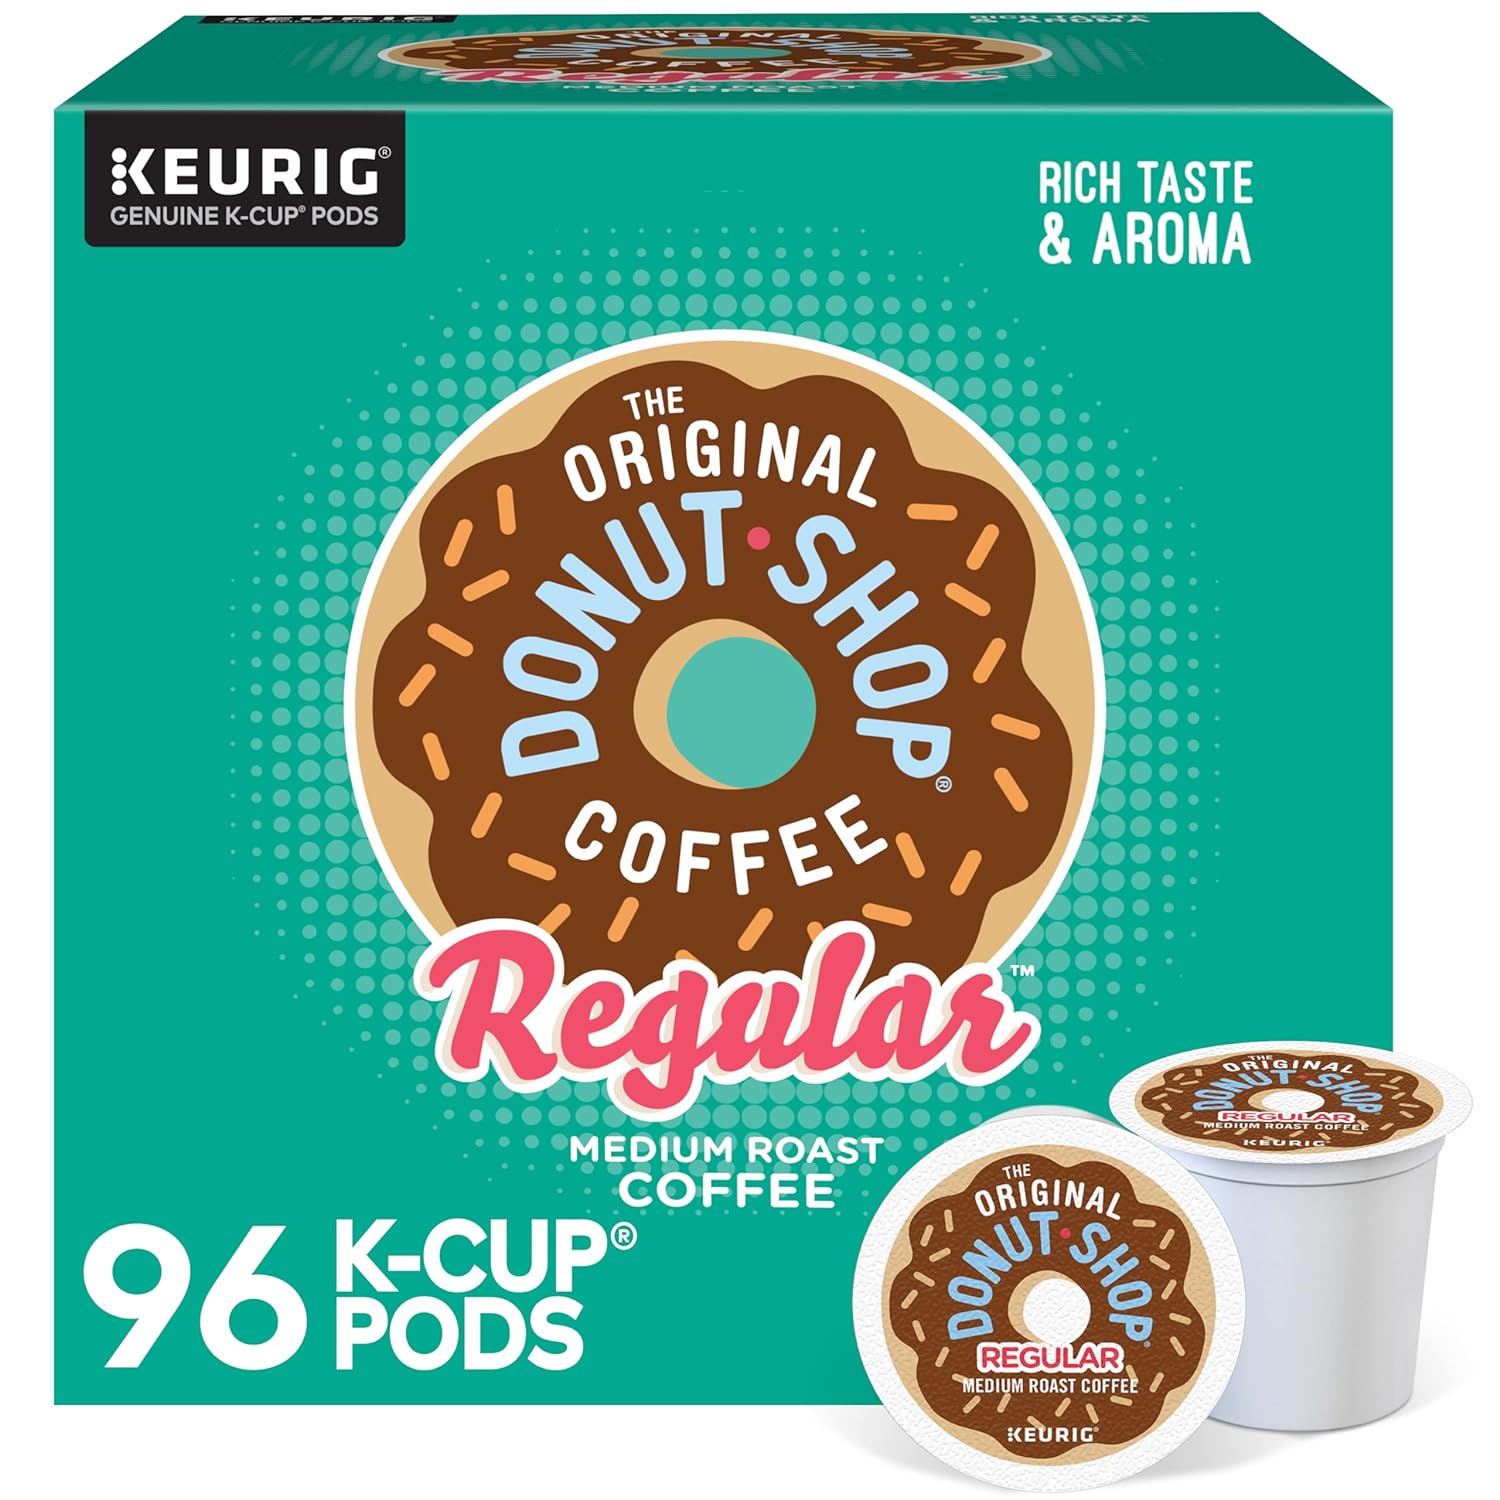 Staples: 88-96 count KCUPS (Peets Major Dickinson, Dunkin, Green Mountain, etc) $34.99 shipped to home can pay w/rewards